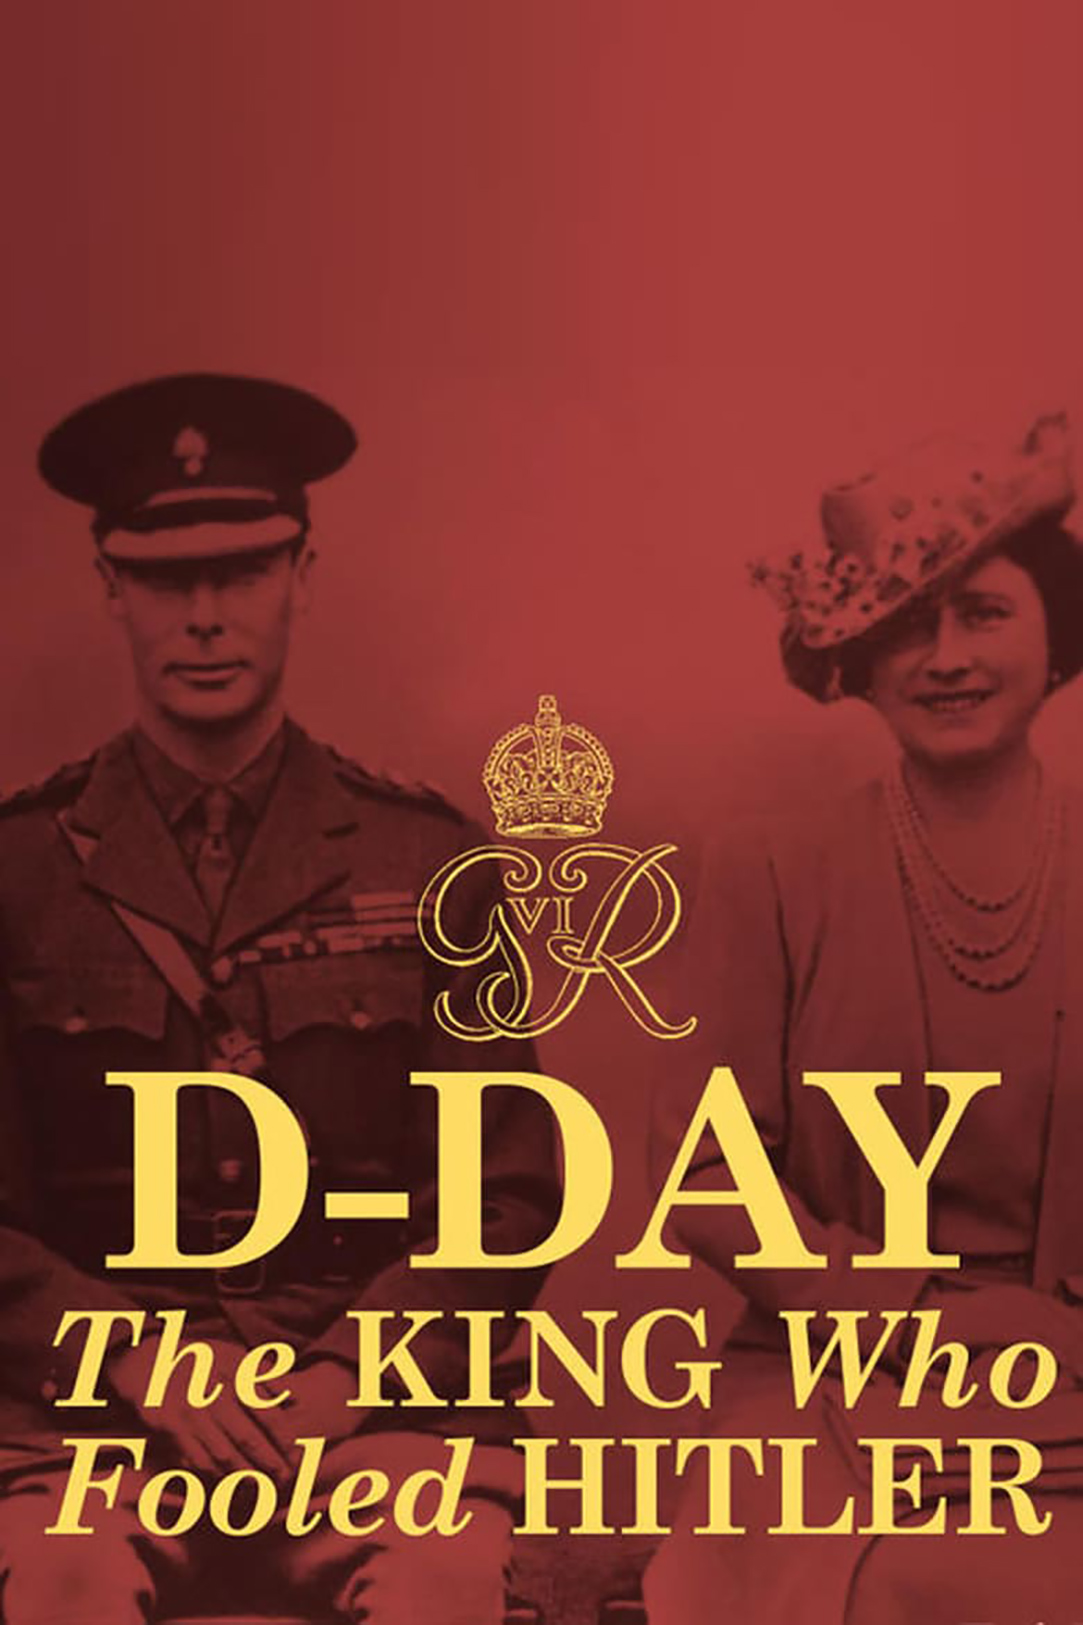 D-Day: The King Who Fooled Hitler (2019)